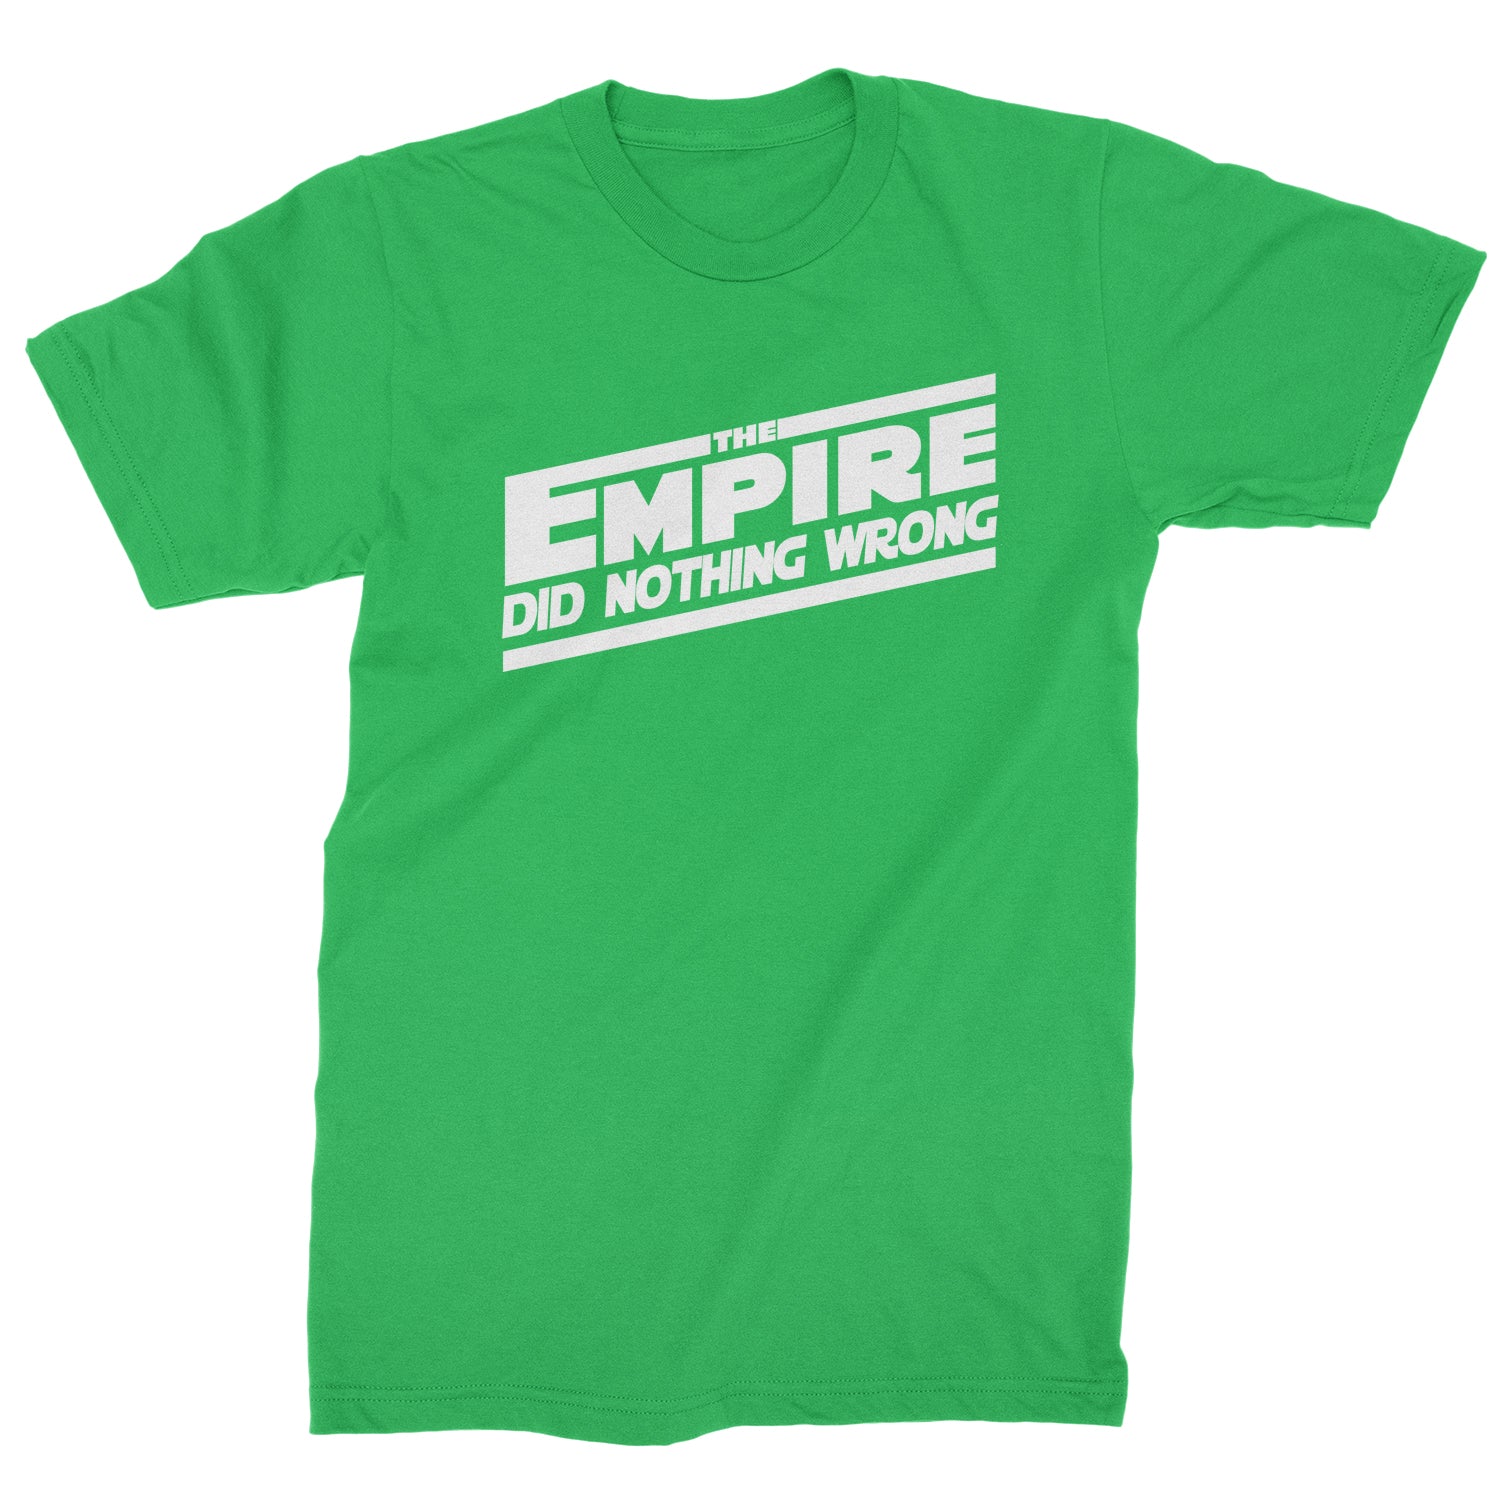 The Empire Did Nothing Wrong Mens T-shirt rebel, reddit, space, star, storm, subreddit, tropper, wars by Expression Tees